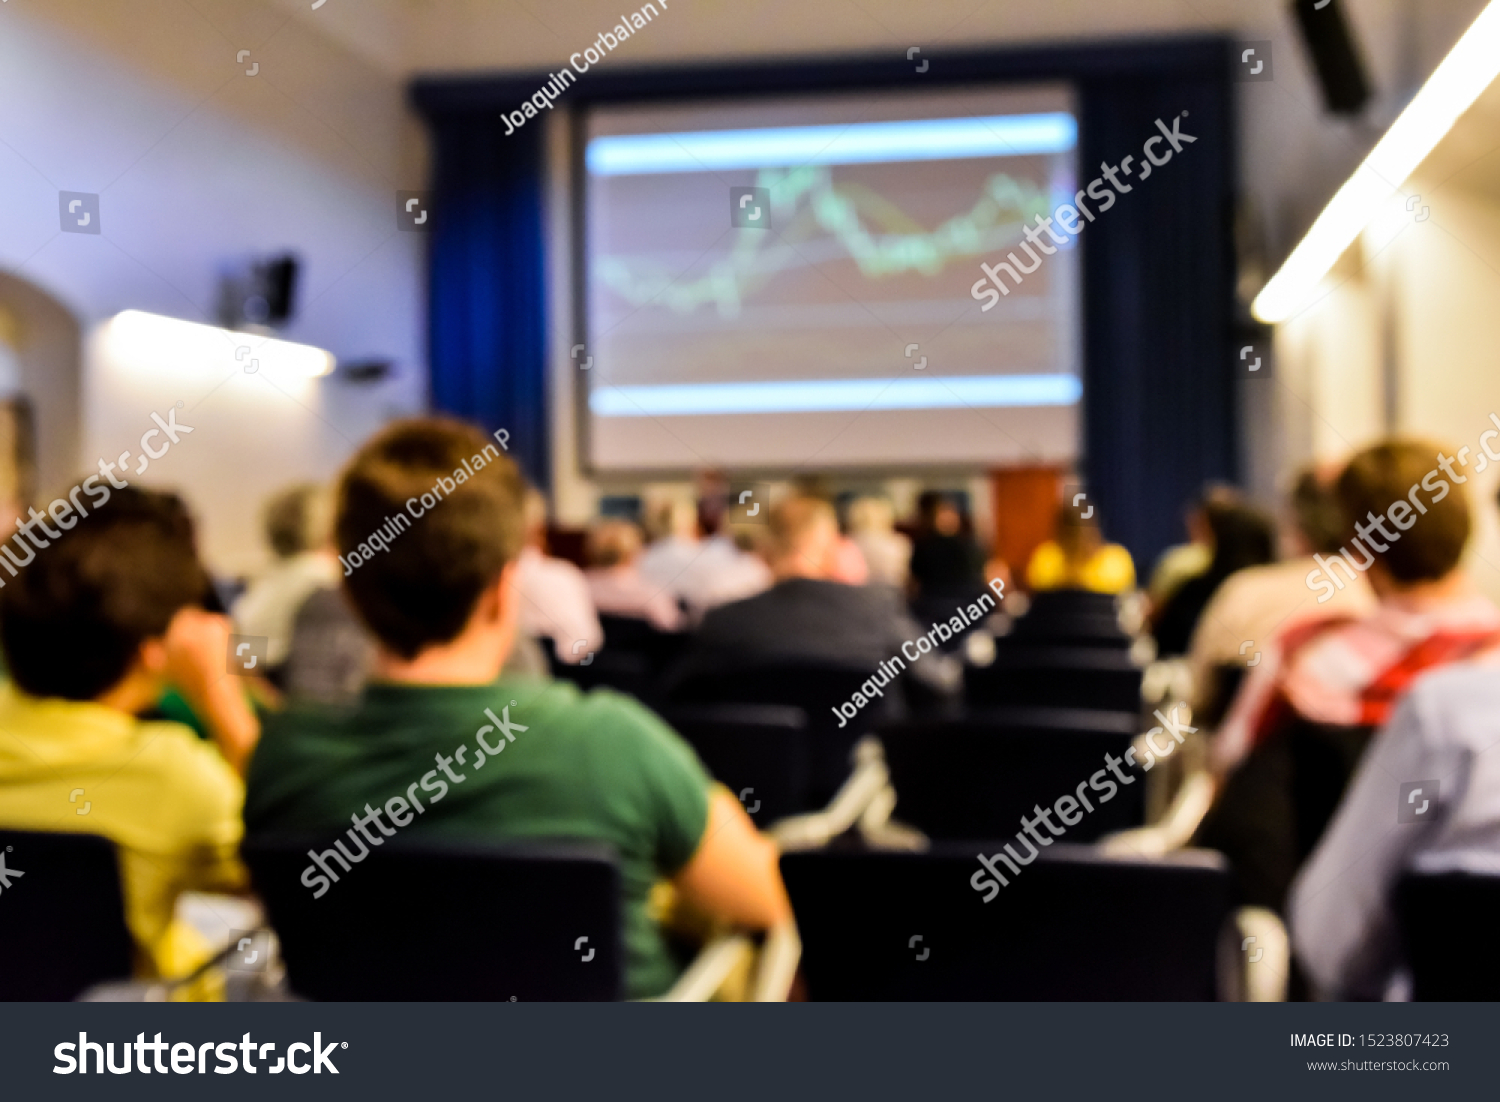 Defocused image of an economics seminar with stock market graphs, with unrecognizable people. #1523807423